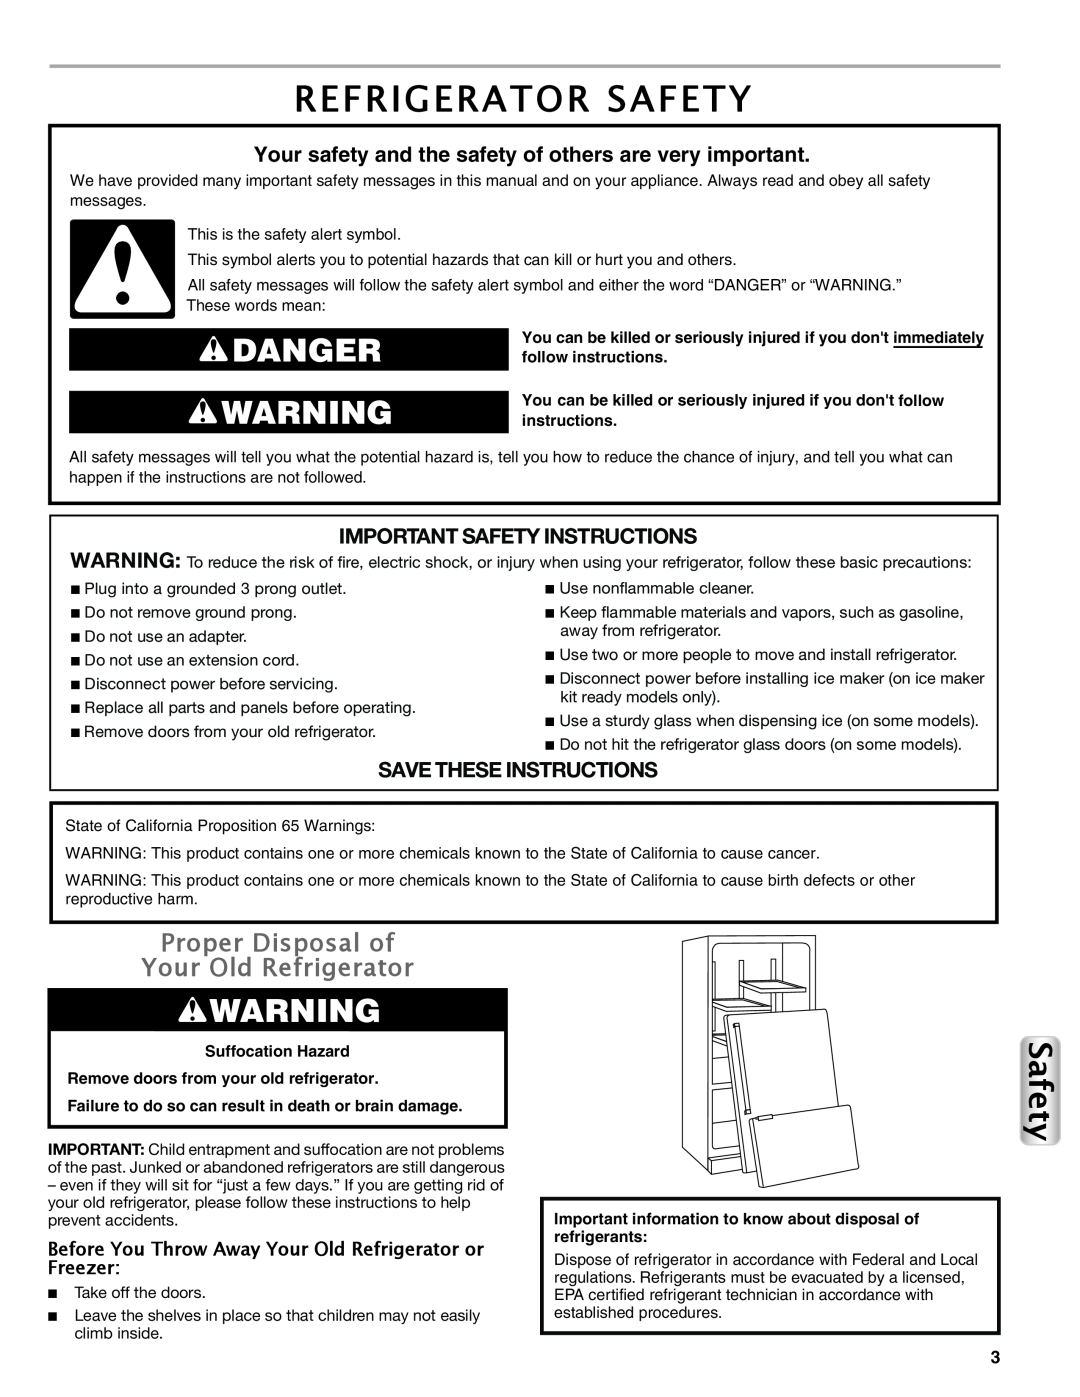 Maytag W10558104A Refrigerator Safety, Danger, Proper Disposal of Your Old Refrigerator, Important Safety Instructions 